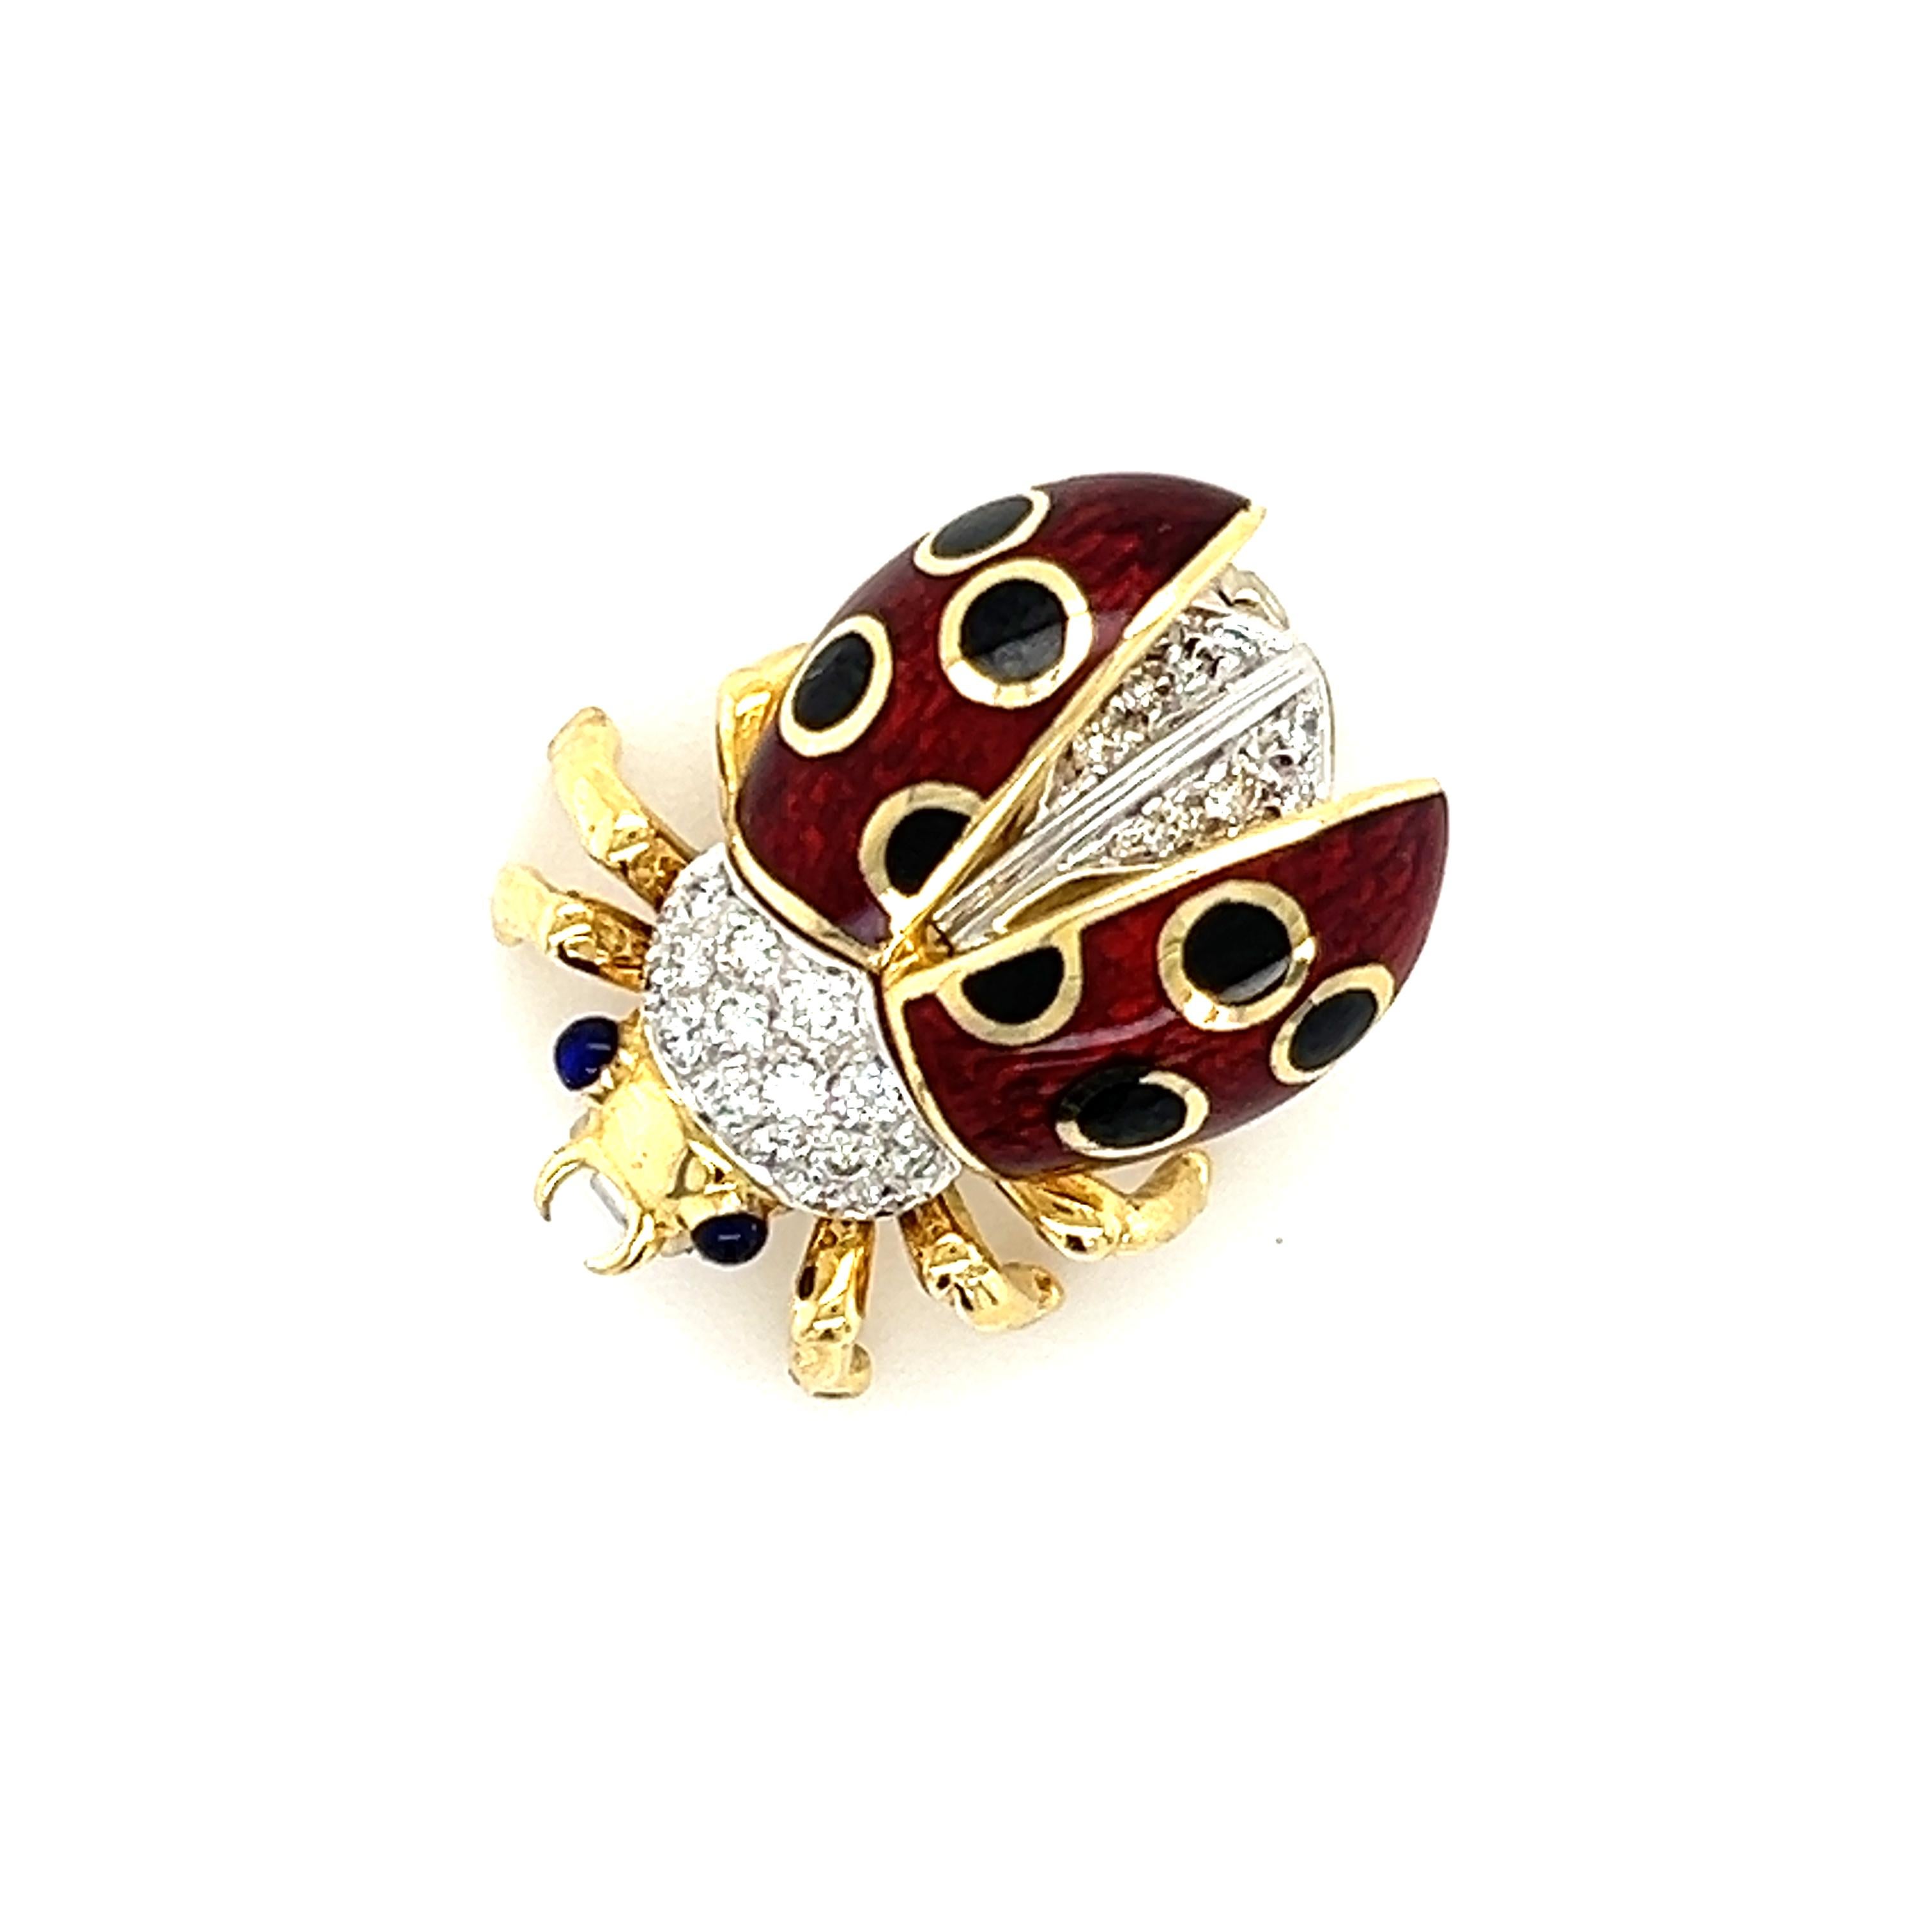 Tiffany & Co. 18k Yellow Gold And Enamel Ladybug Diamond Brooch In Excellent Condition For Sale In MIAMI, FL